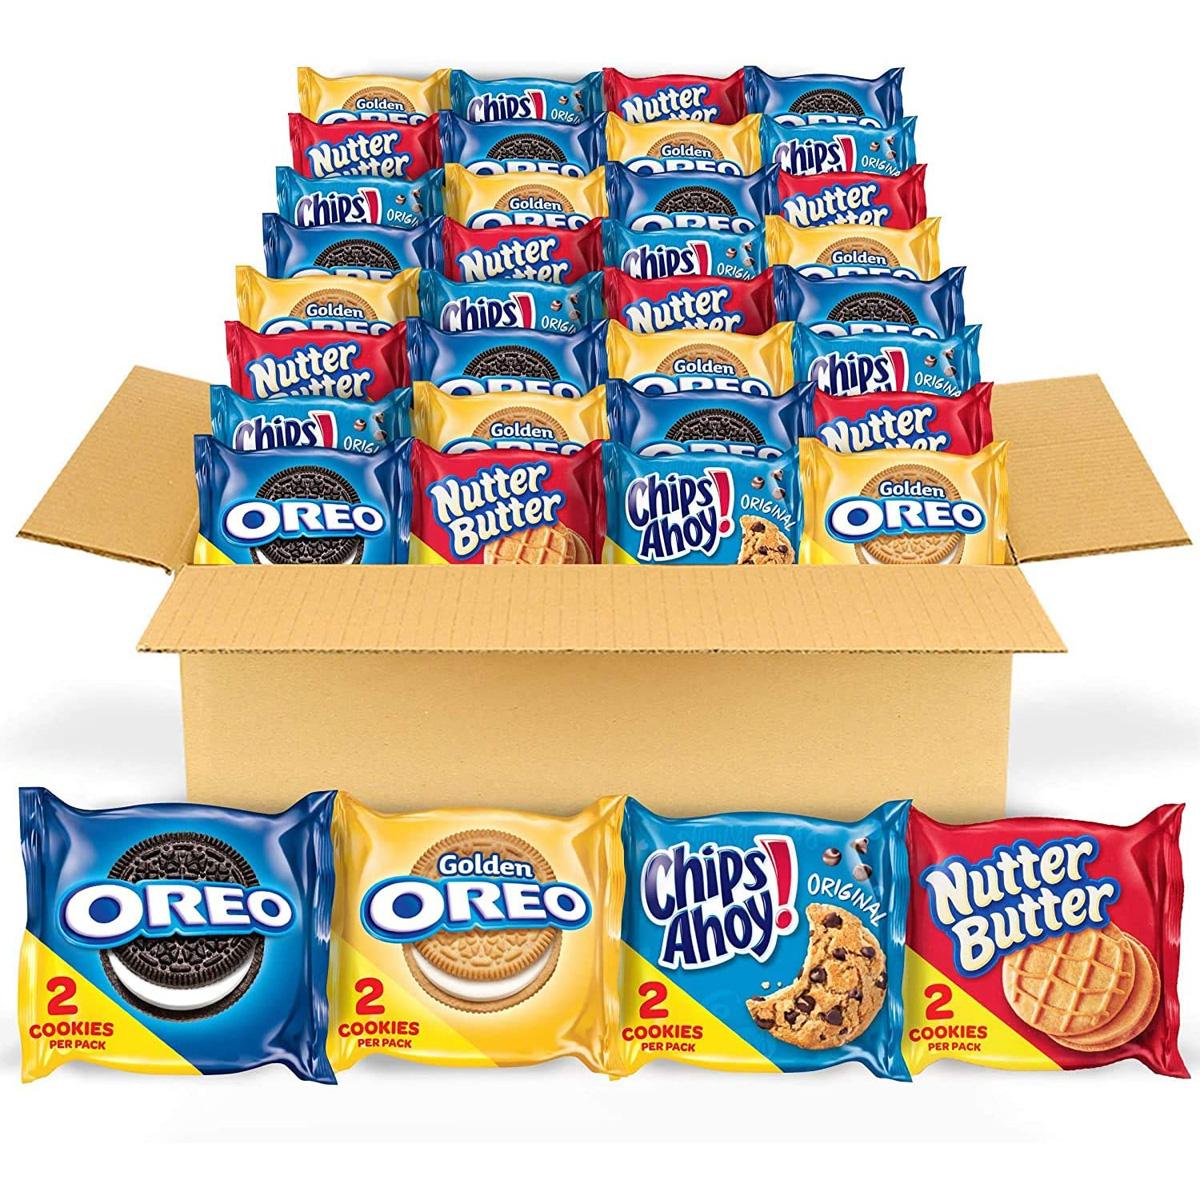 56 Oreo Cookie Variety Pack for $10.24 Shipped